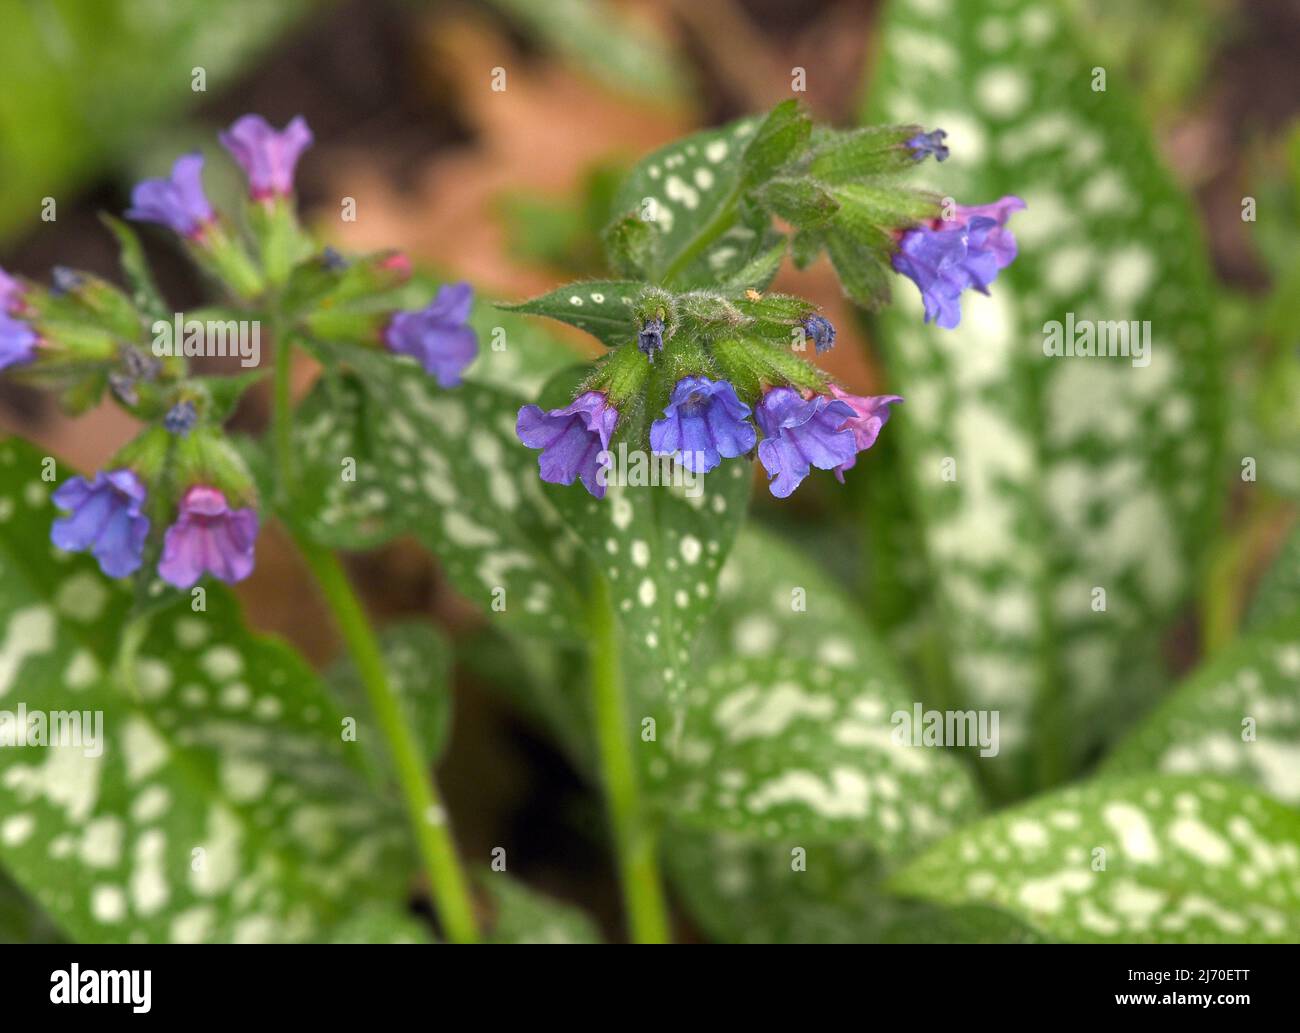 Lung herb Pulmonaria, officinalis is an important medicinal and medicinal plant with blue flowers. Stock Photo